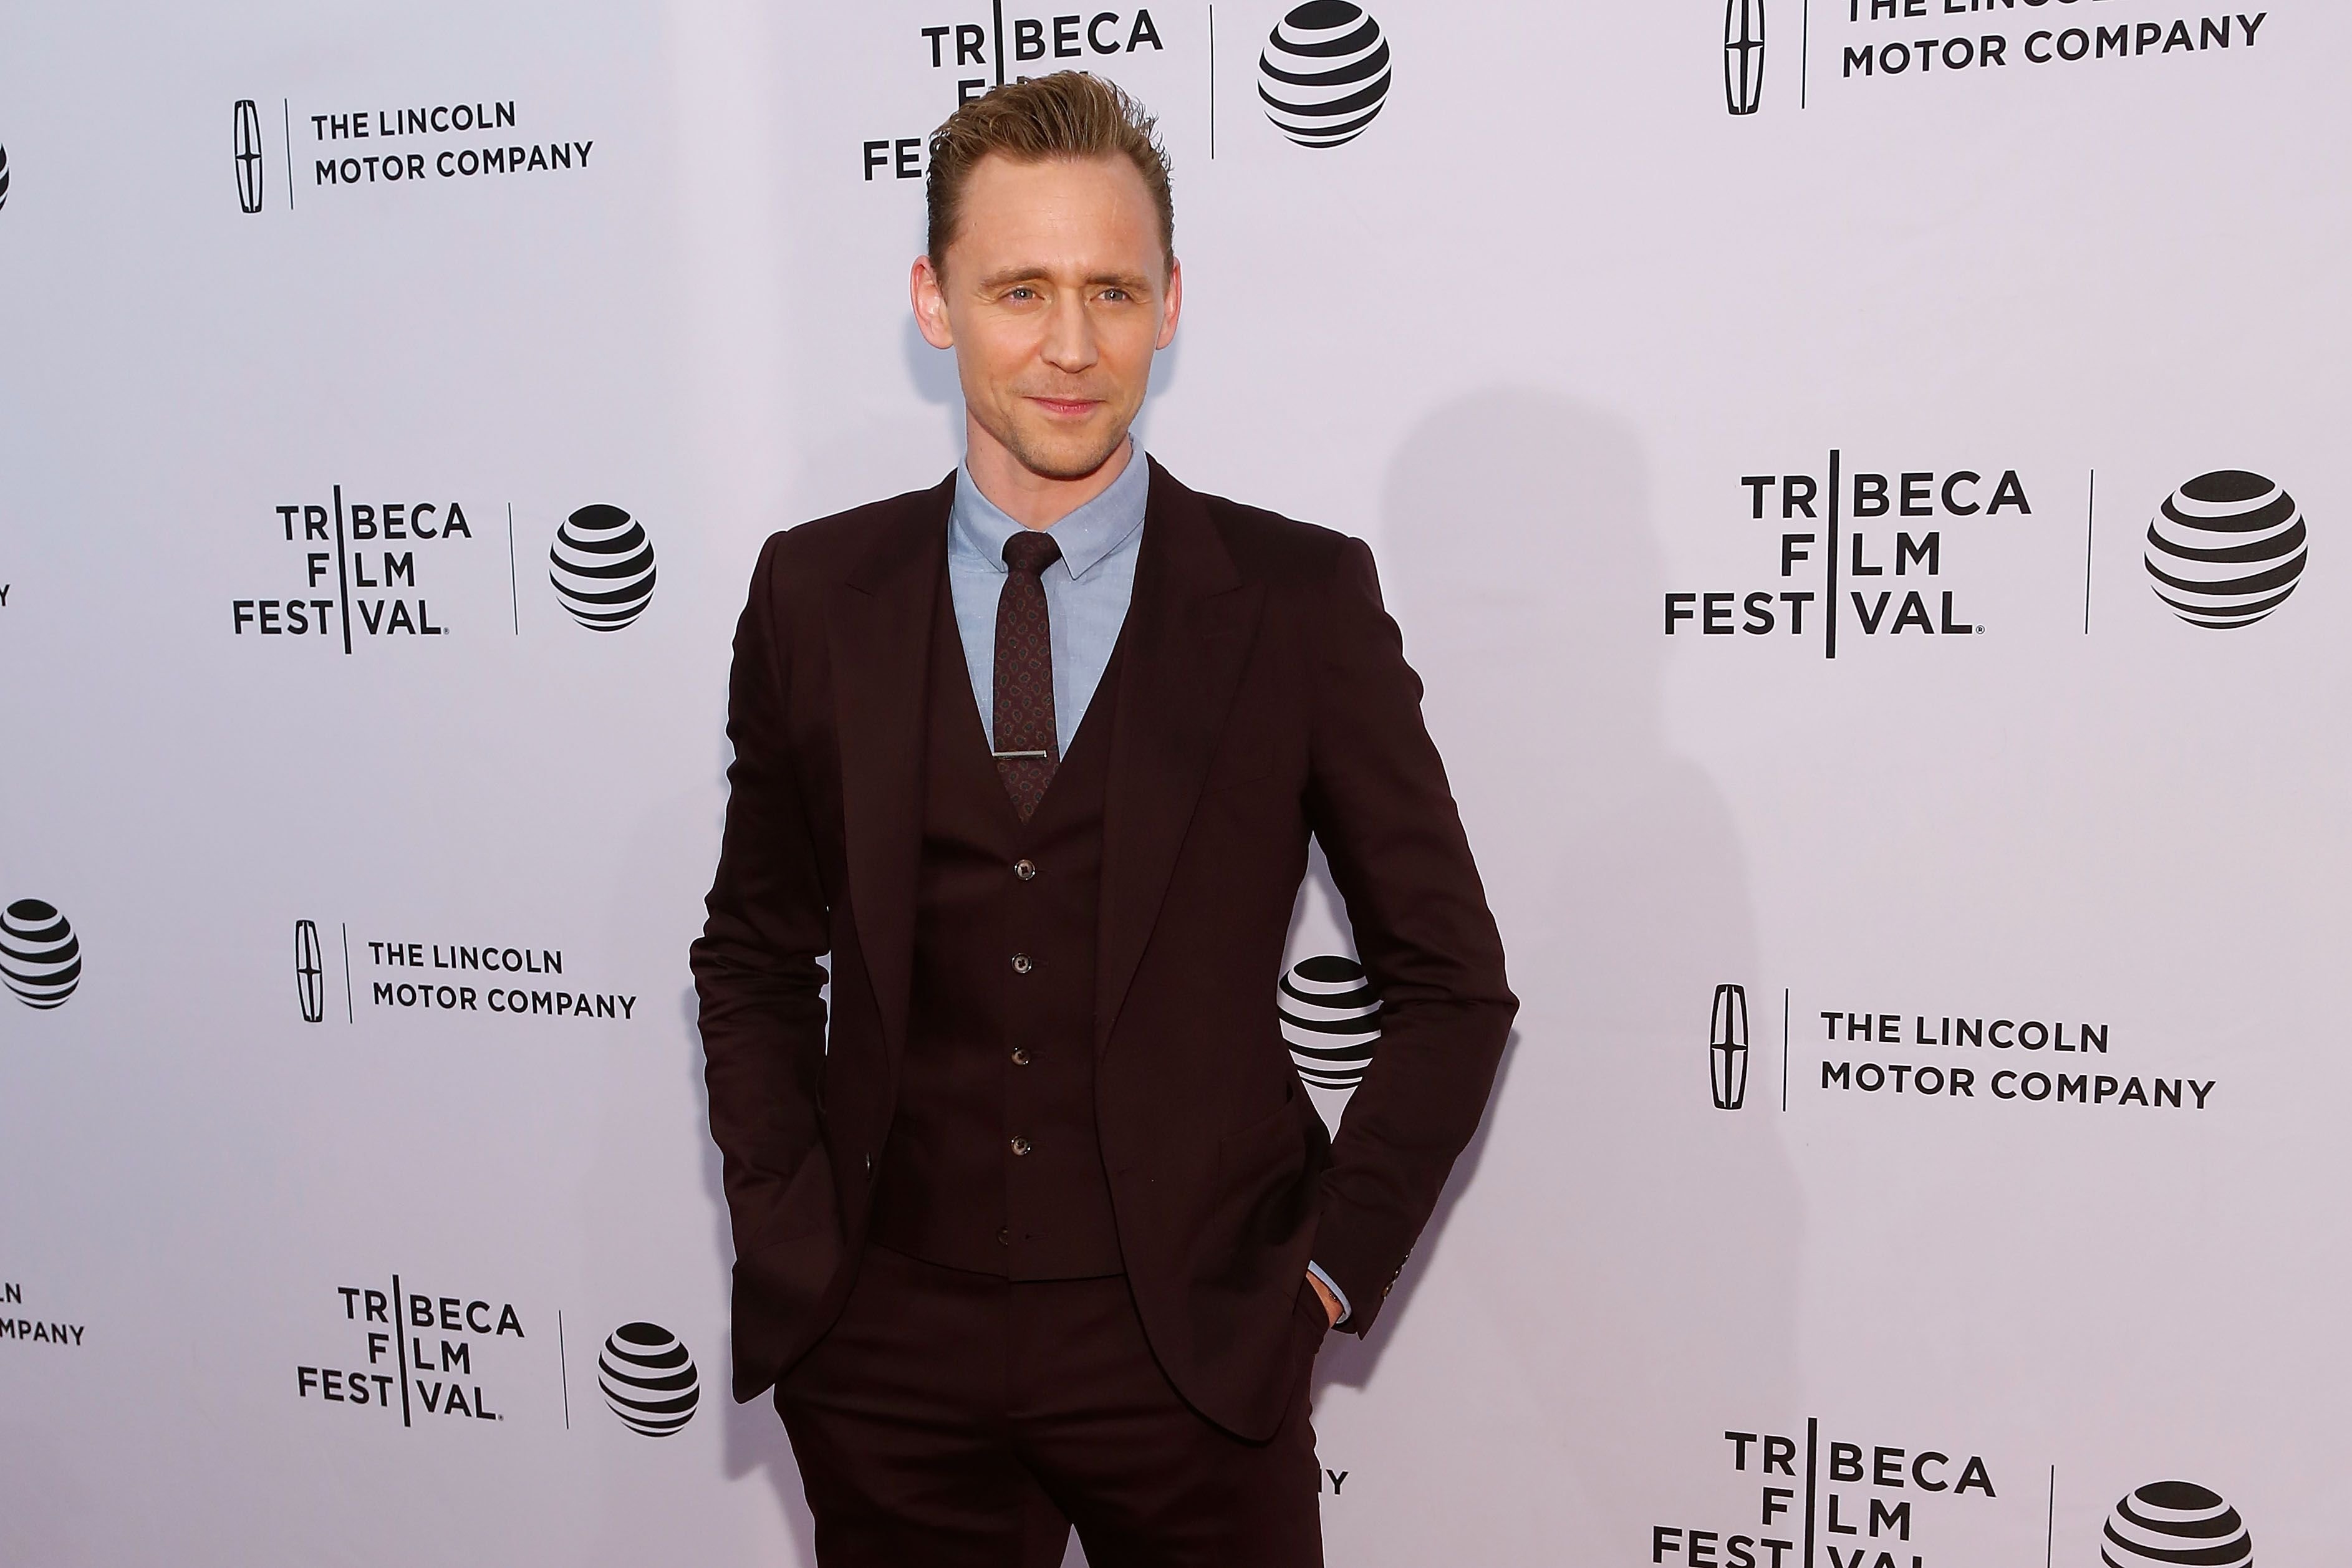 Tom Hiddleston at the premiere of "High-Rise" during the 2016 Tribeca Film Festival in New York City | Source: Getty Images